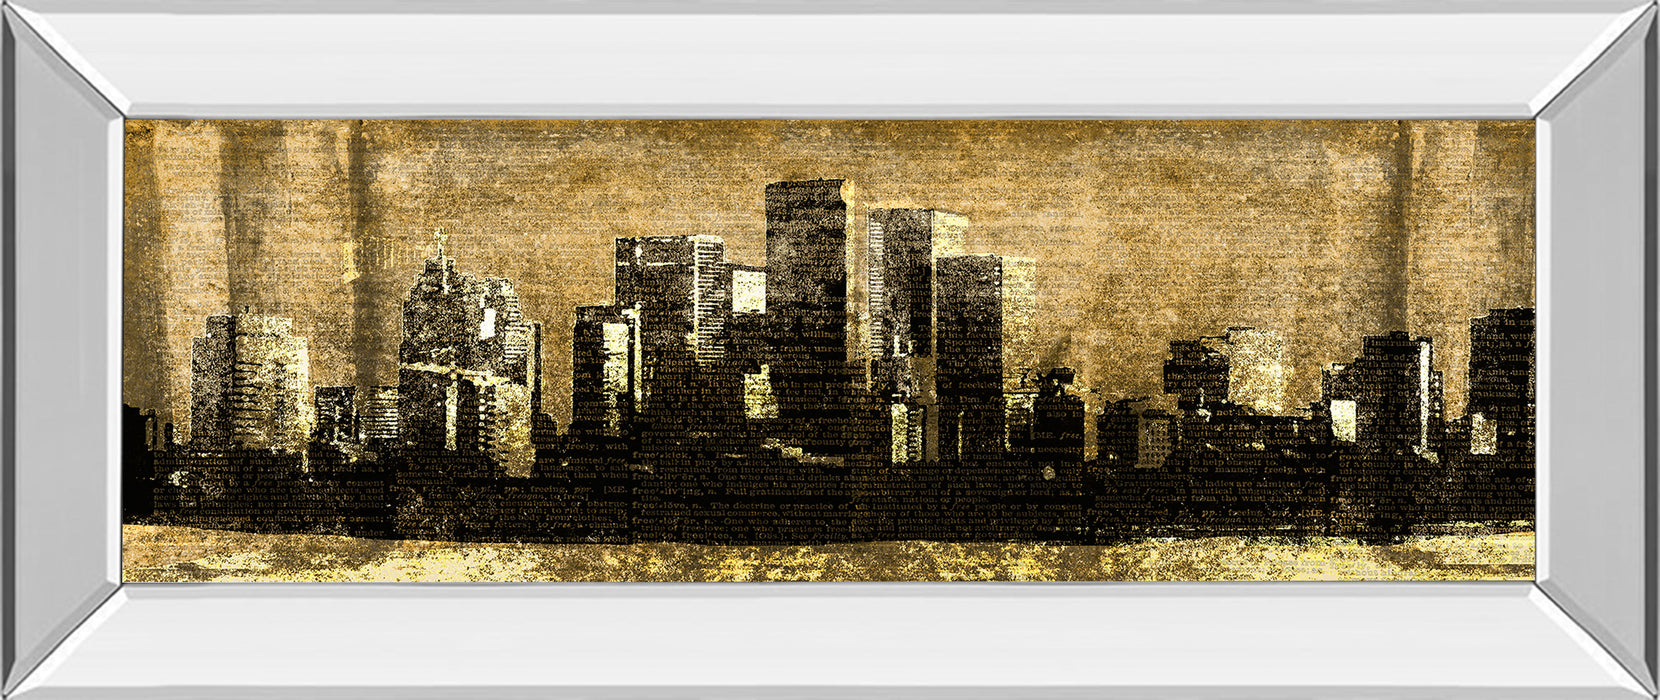 Defined City Il By Sd Graphic Studio - Mirror Framed Print Wall Art - Black